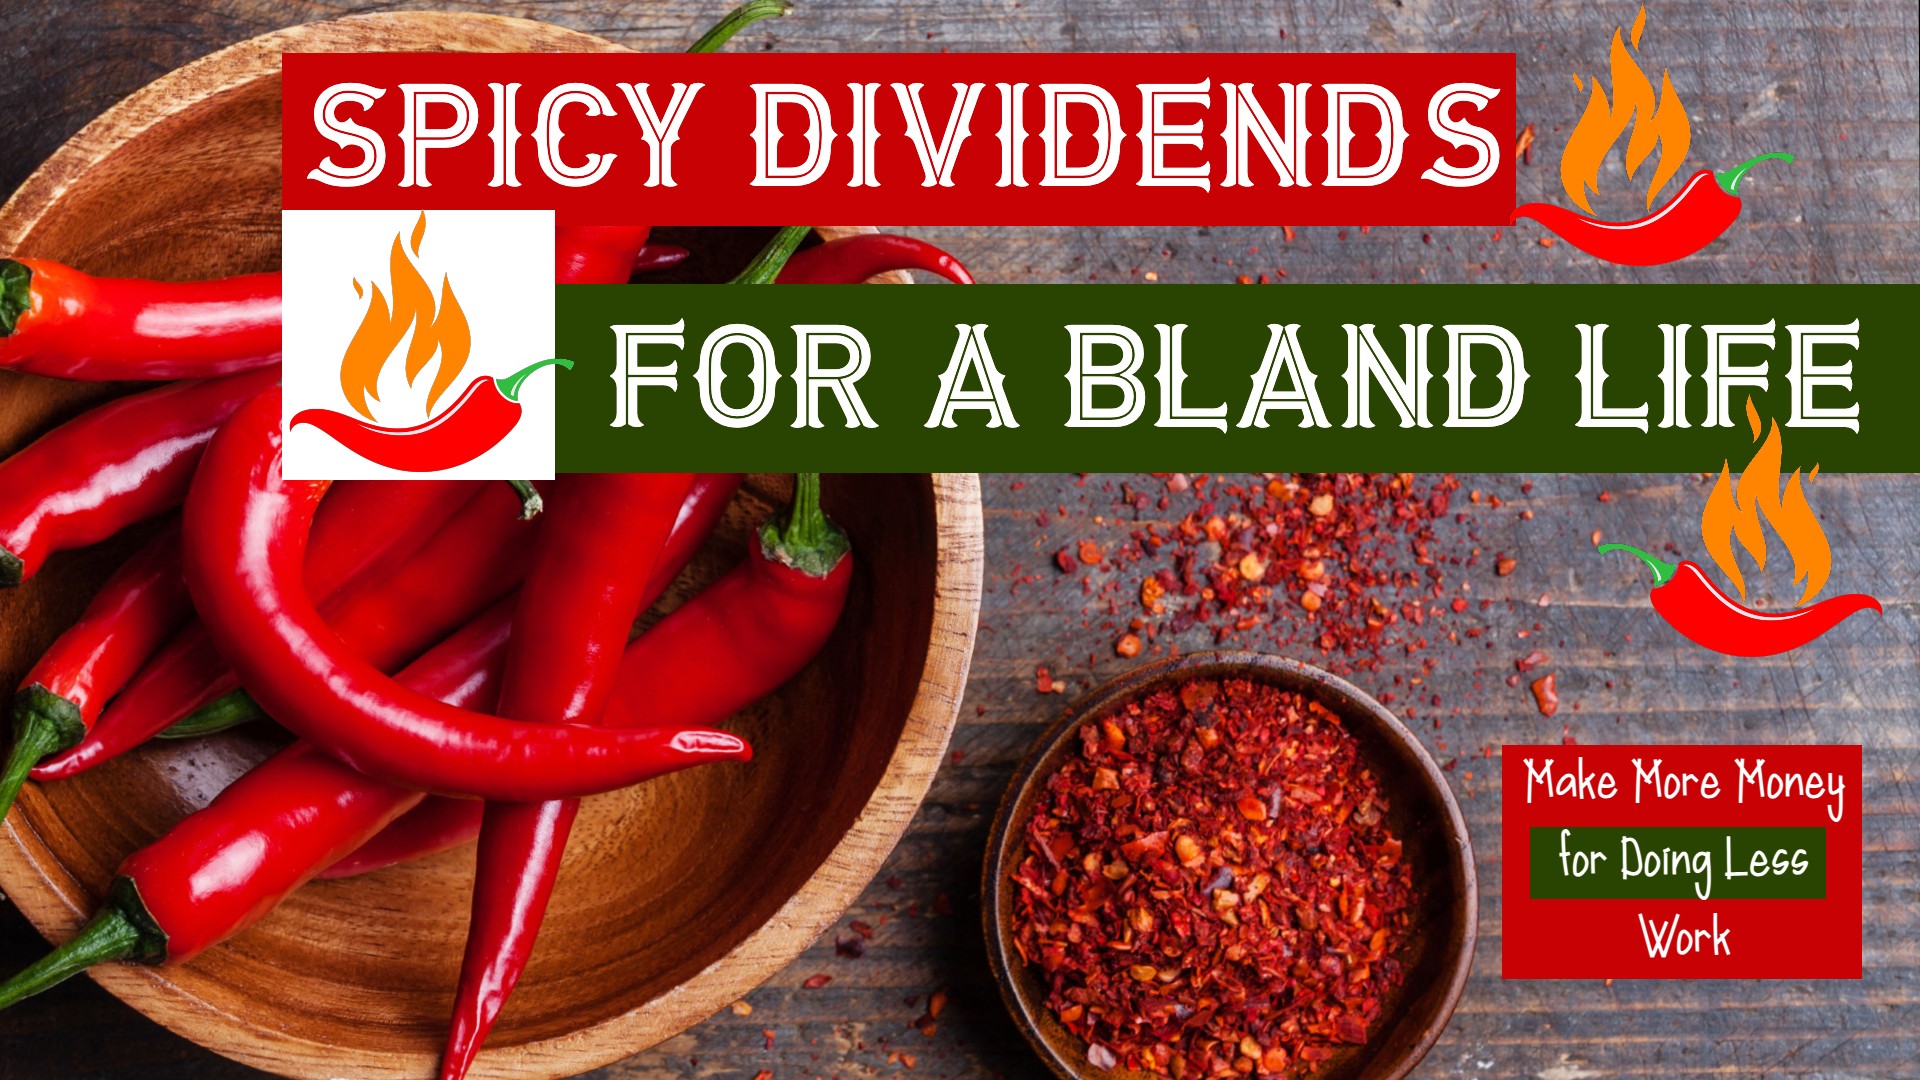 Spicy Dividends for a Bland Life